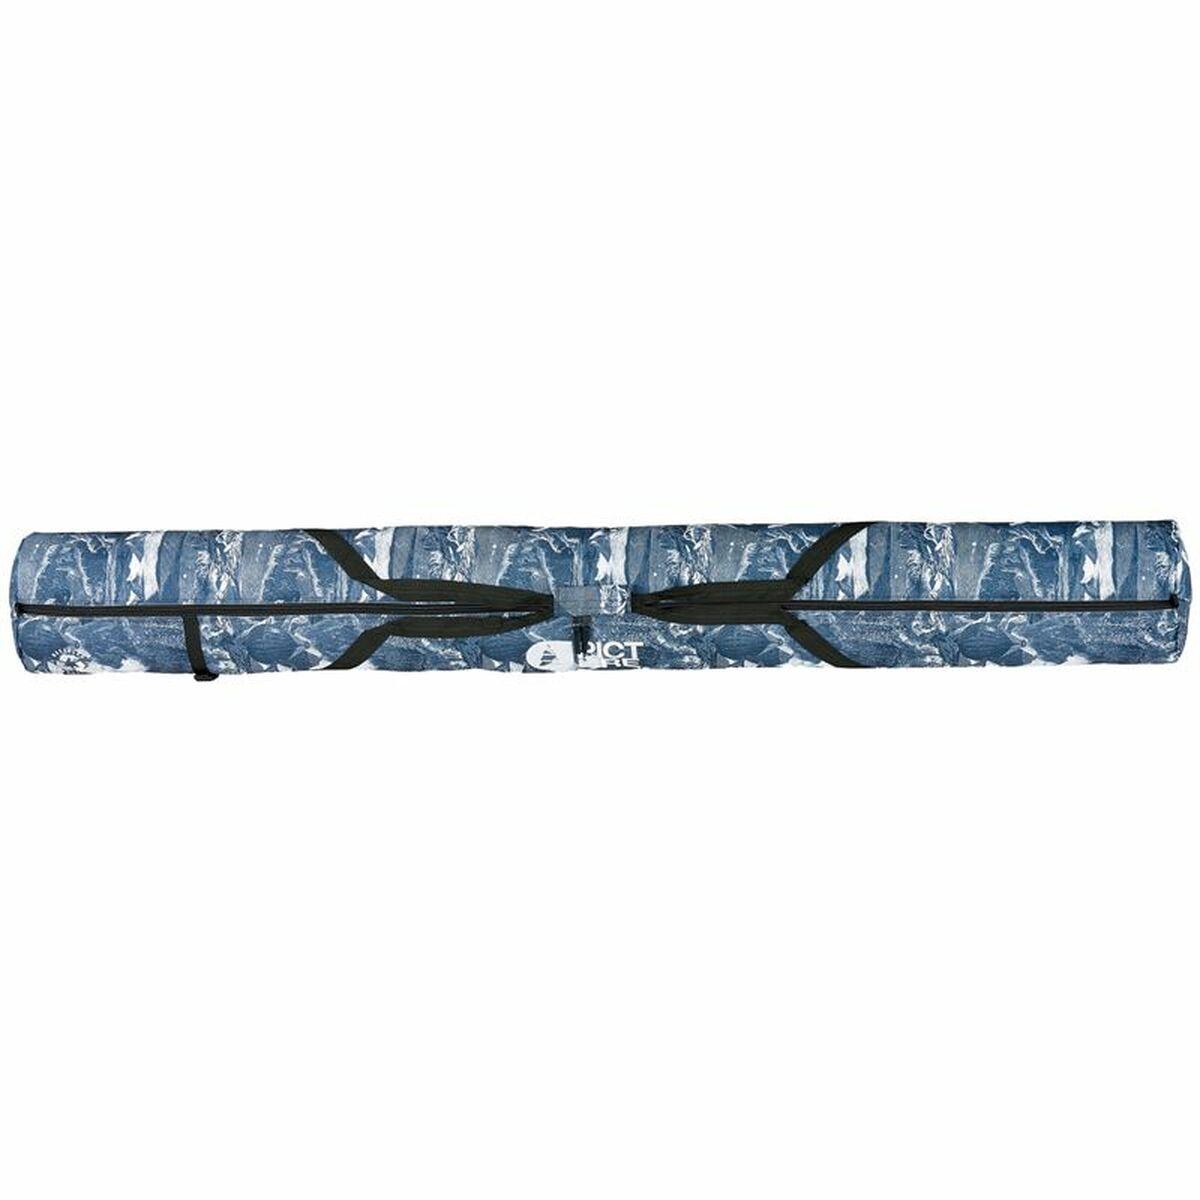 Ski rack Picture Blue One size - VirtuousWares:Global